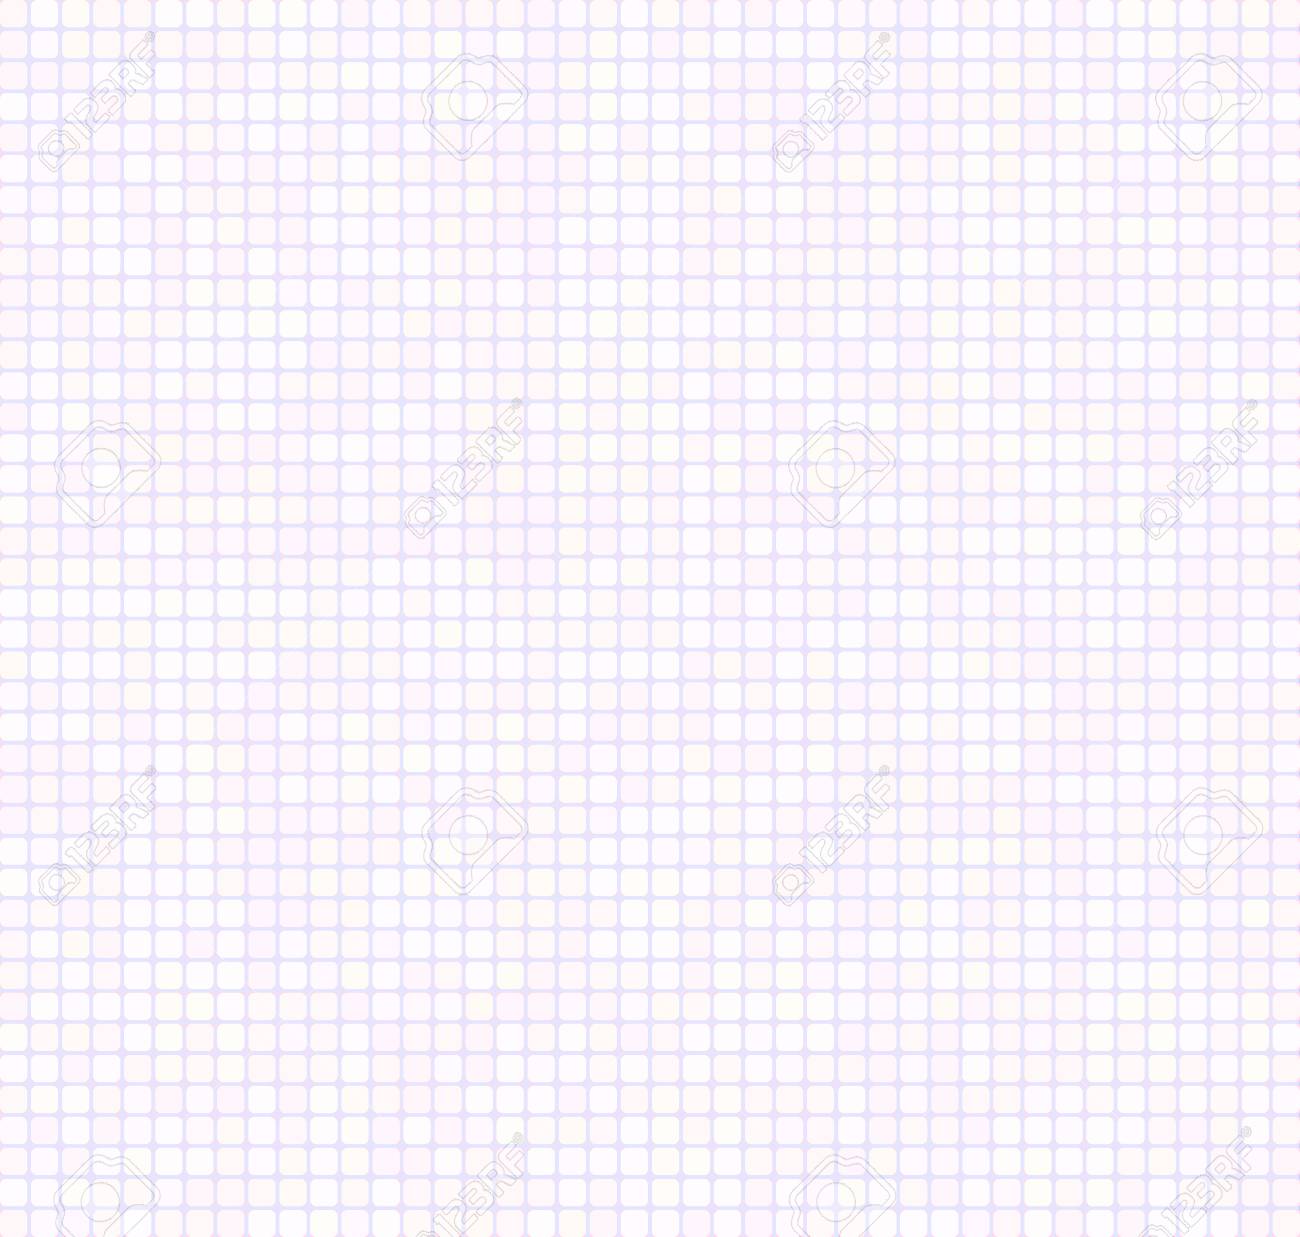 Technical Grid Background Square Pattern In